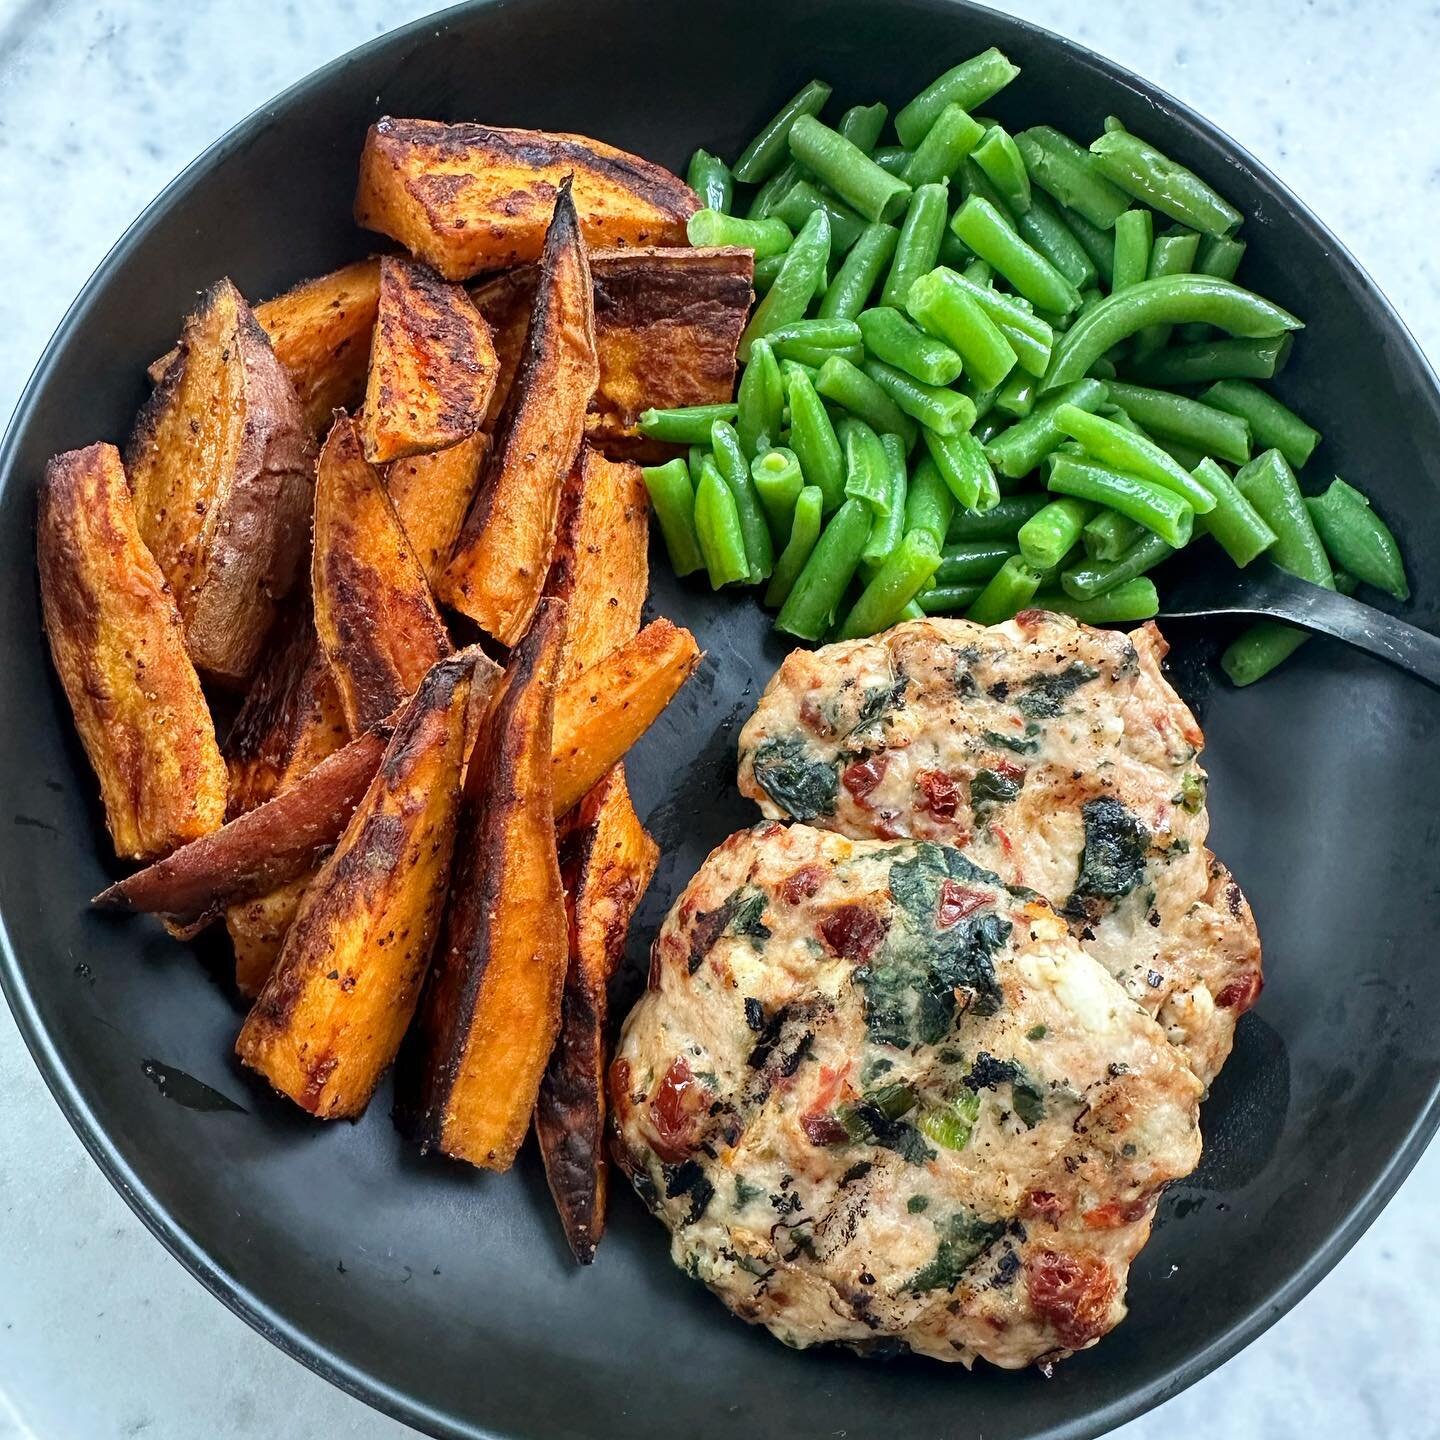 This weeks easy meal prep -
Cajun sweet potatoes, green beans, and chicken burgers with sun dried tomatoes, spinach and feta. 

Chicken burgers - mix one pound ground chicken with 1/4cup chopped sun dried tomatoes (I used Trader Joe&rsquo;s in olive 